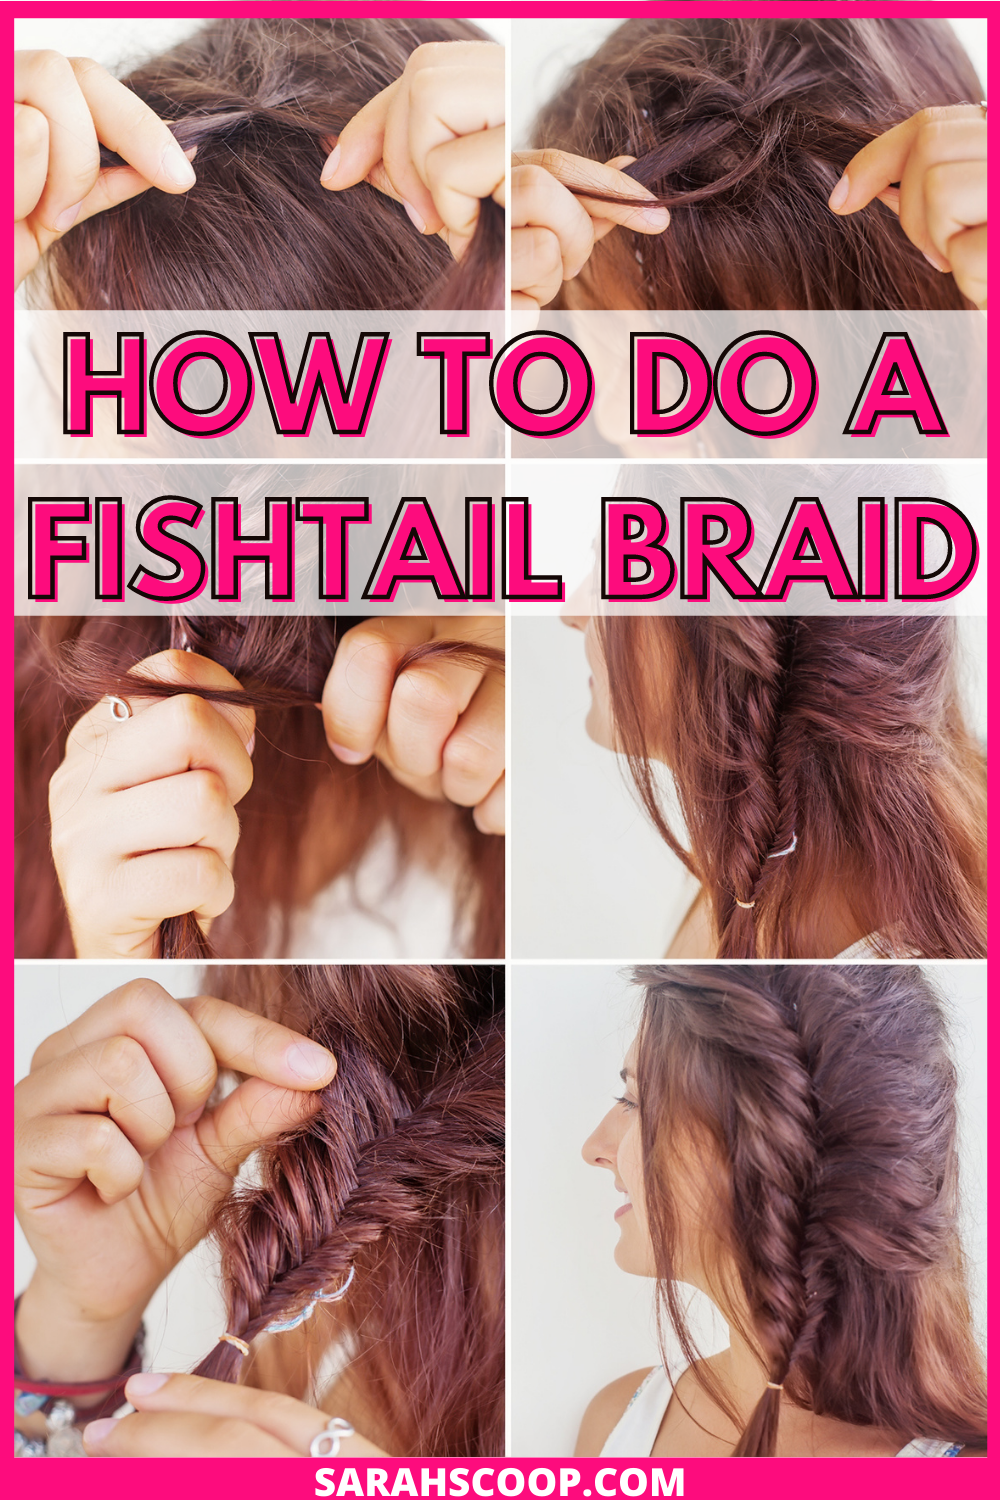 How to Do a Fishtail Braid: Step By Step Instructions - Sarah Scoop